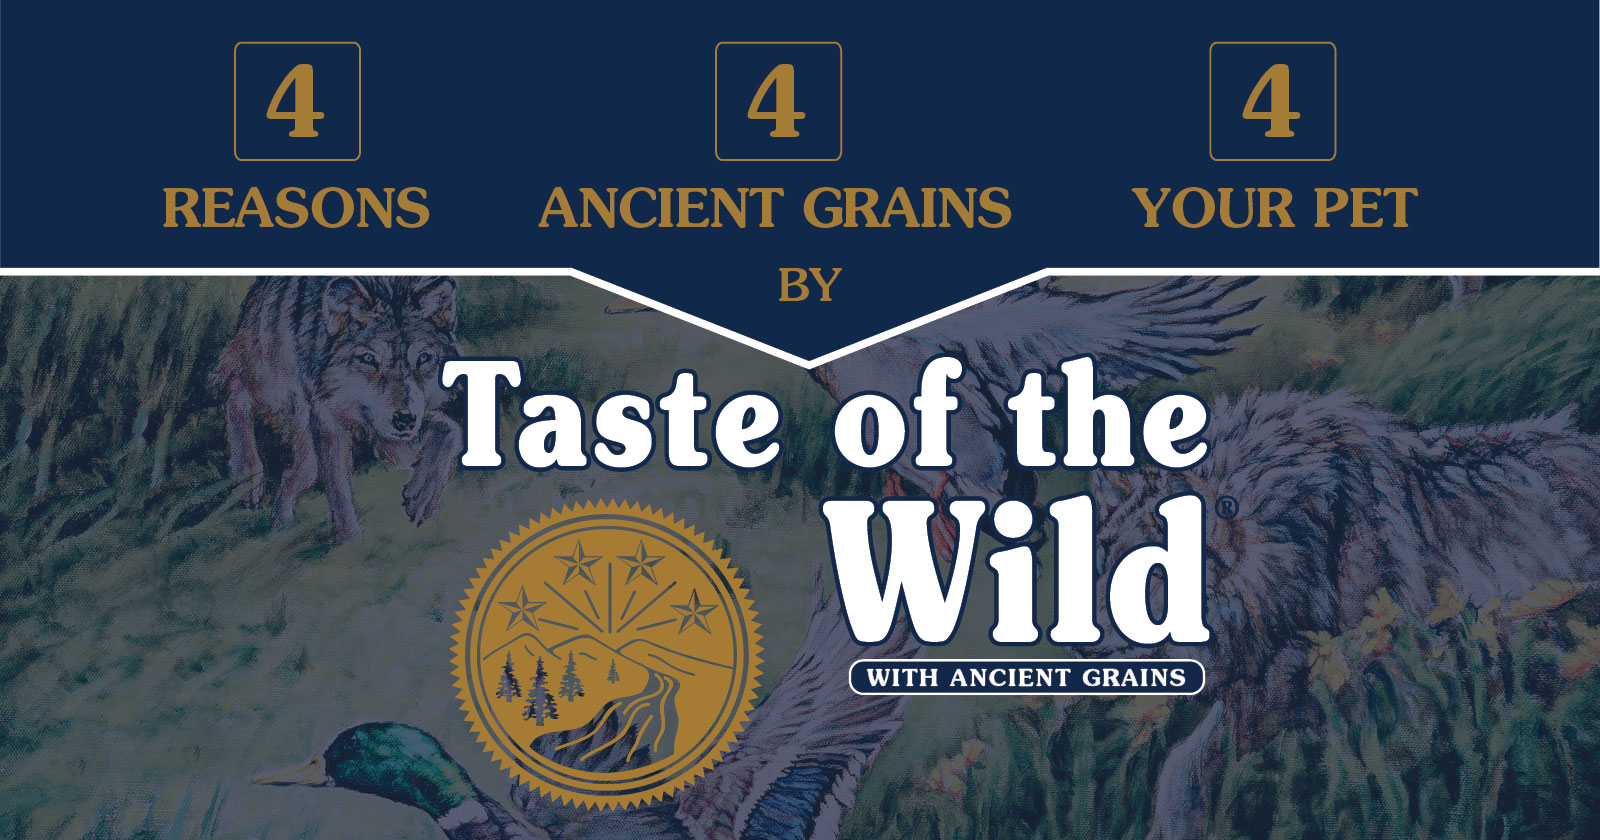 Taste of the Wild with Ancient Grains Benefits | Taste of the Wild